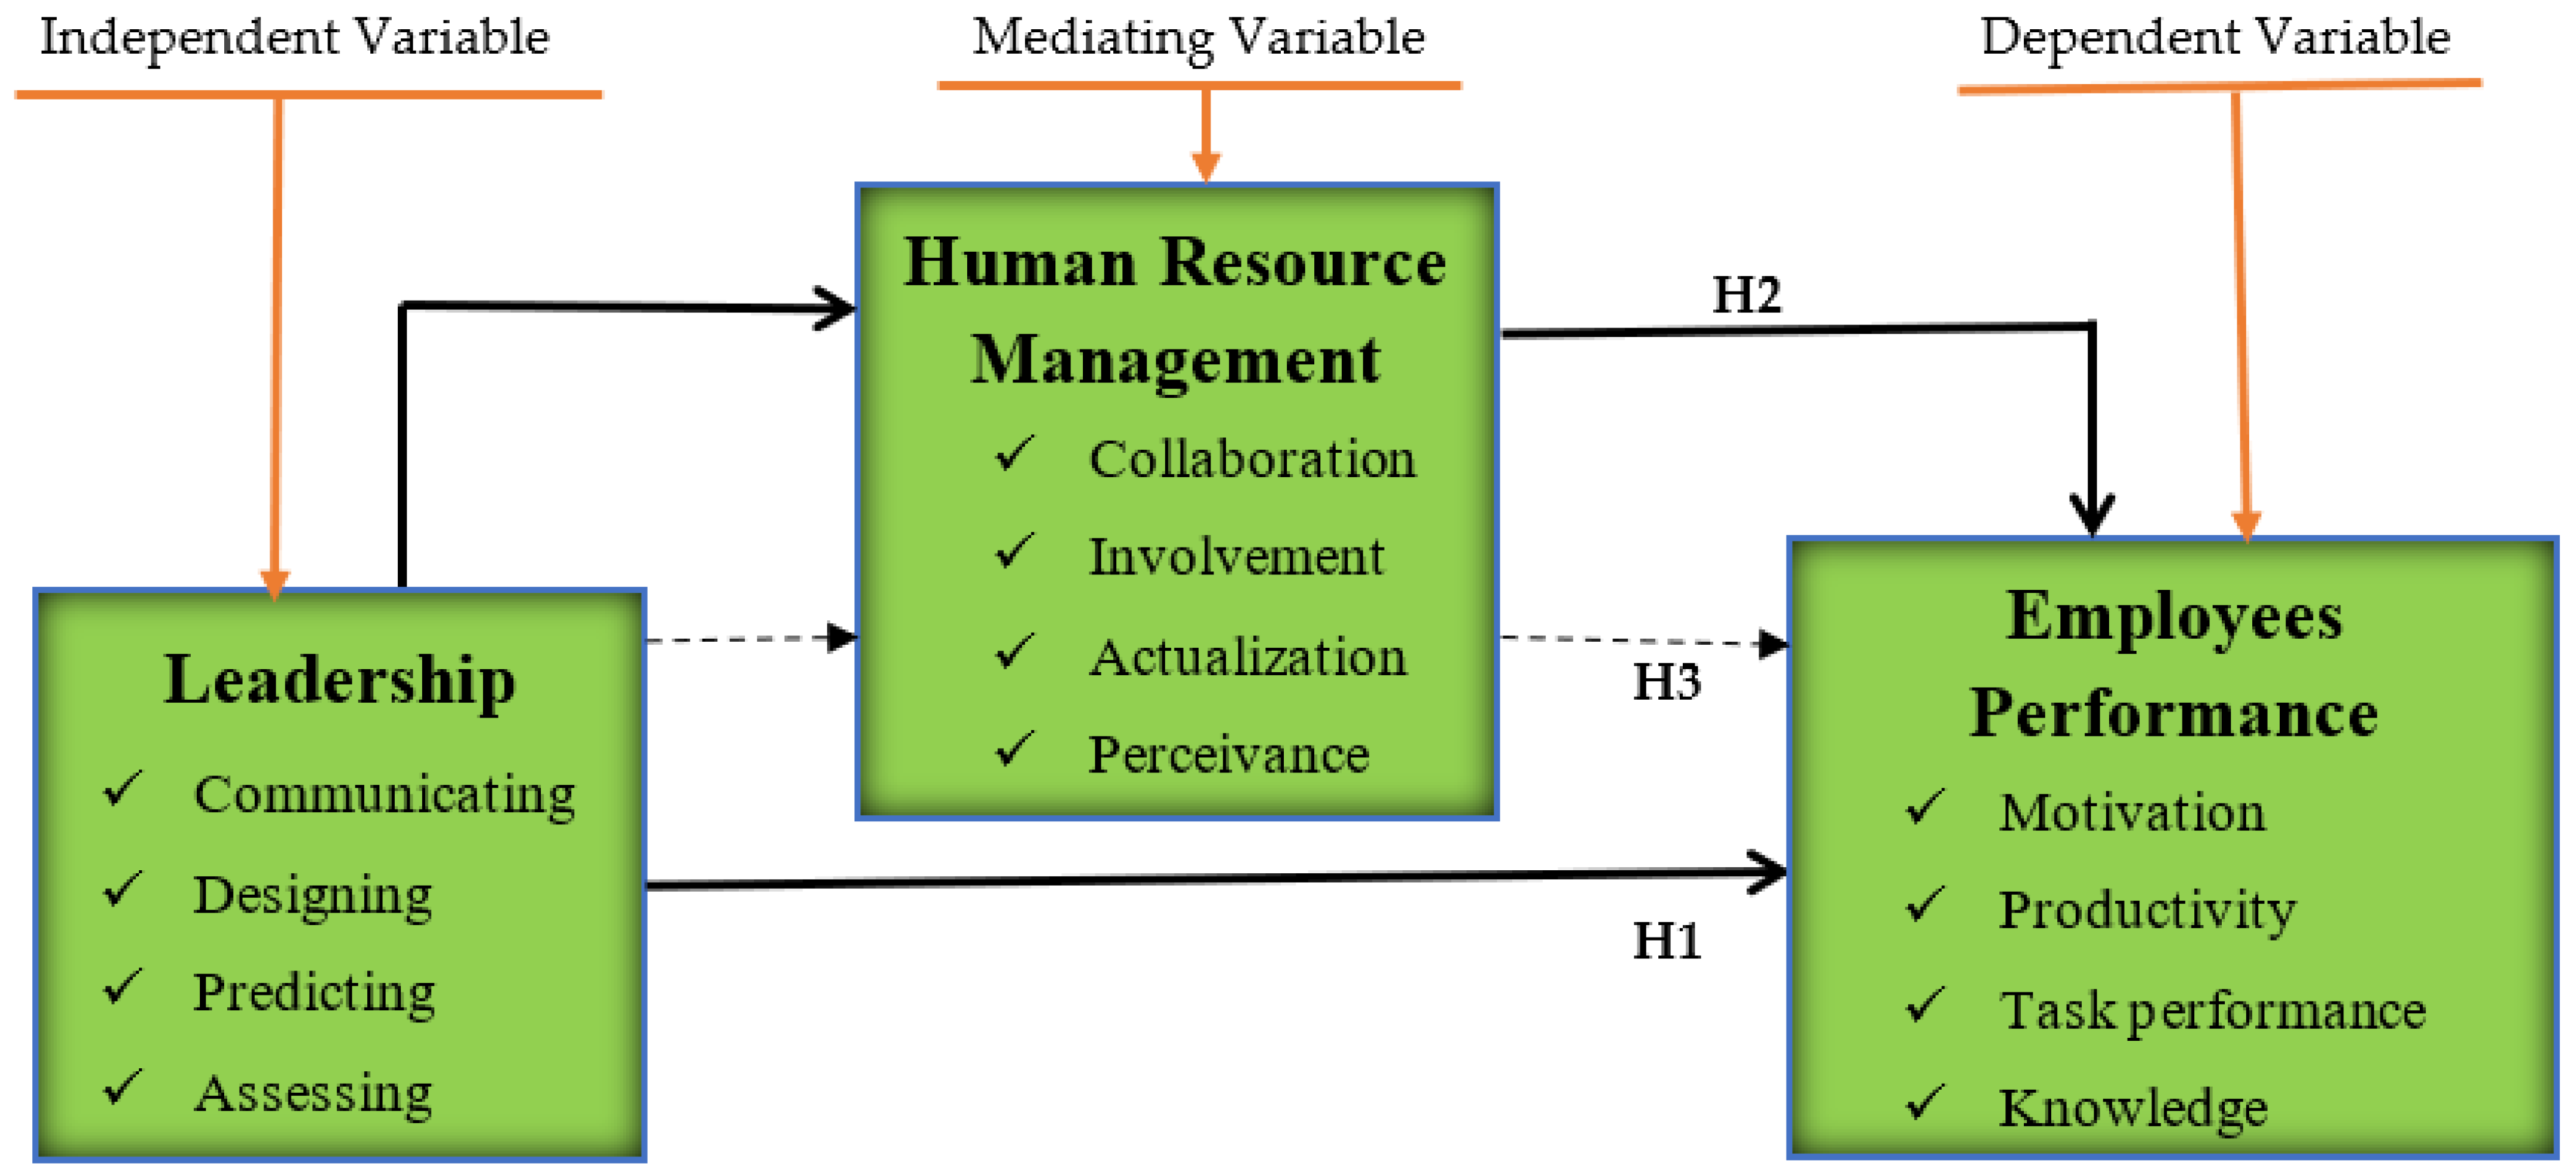 human resources leadership case study